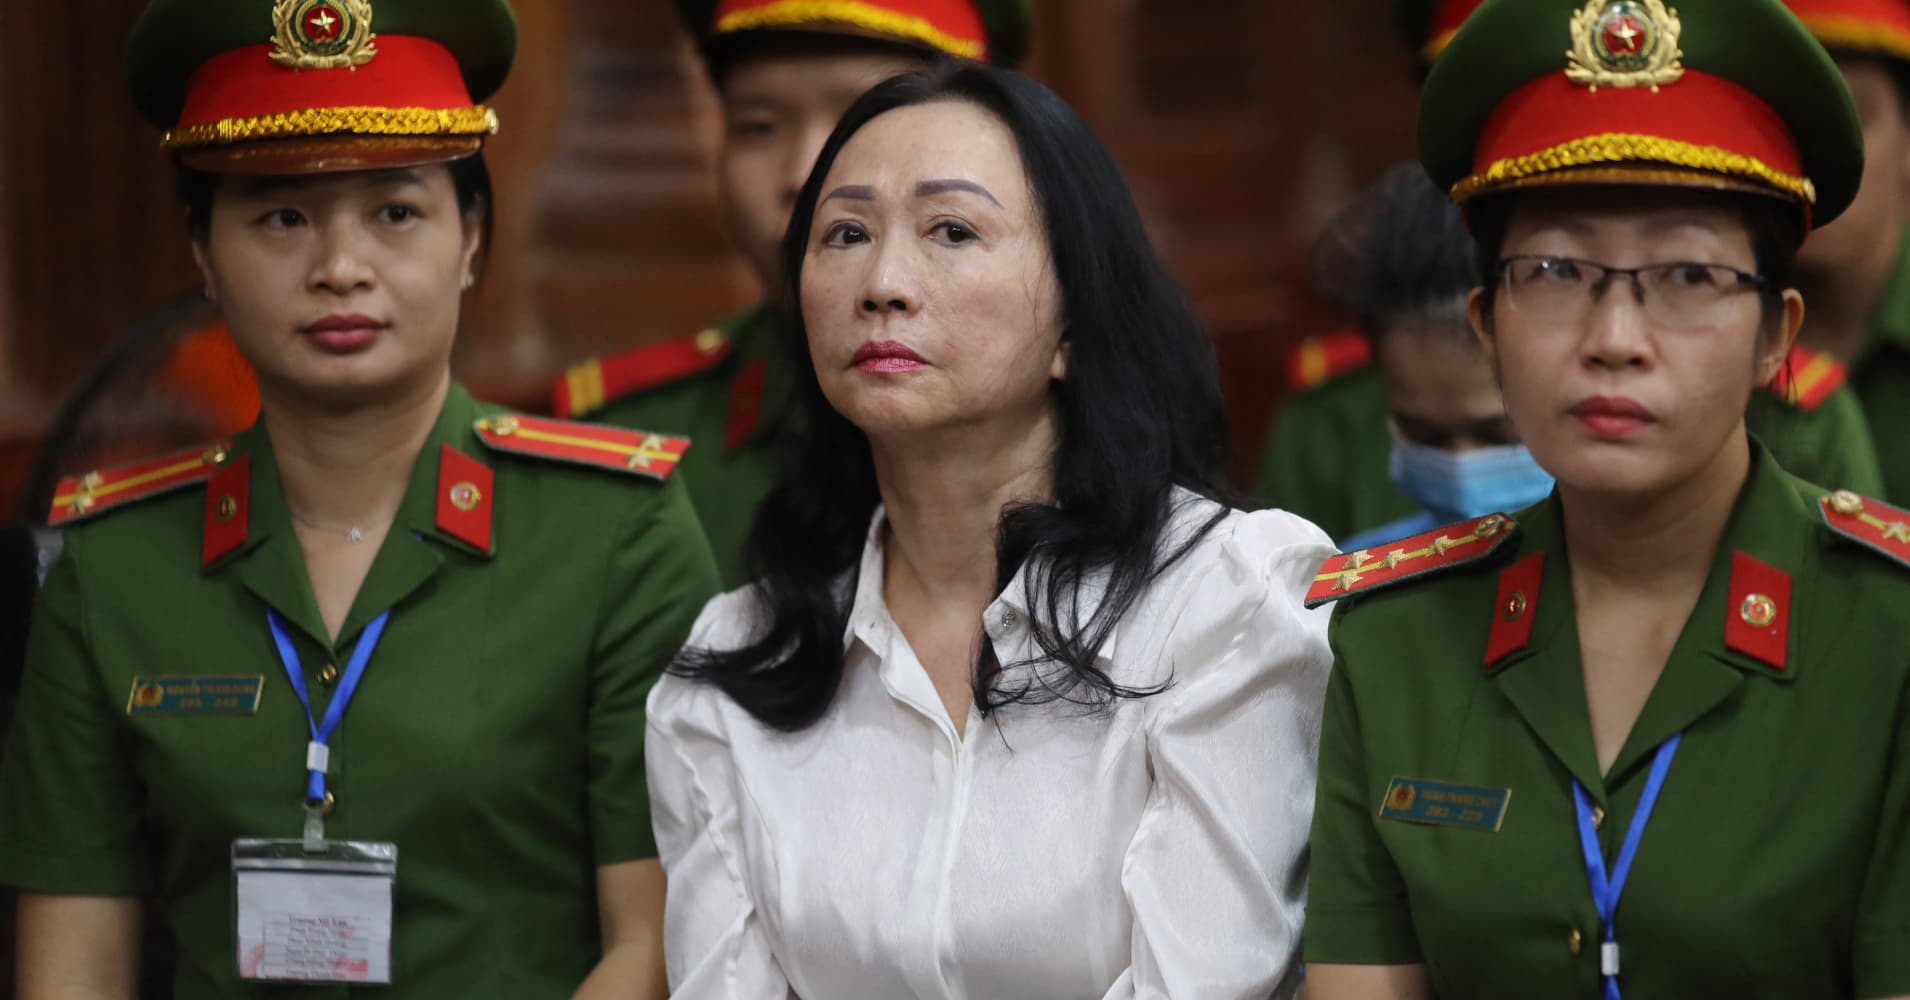 vietnamese property tycoon sentenced to death in country’s largest financial fraud, state media reports